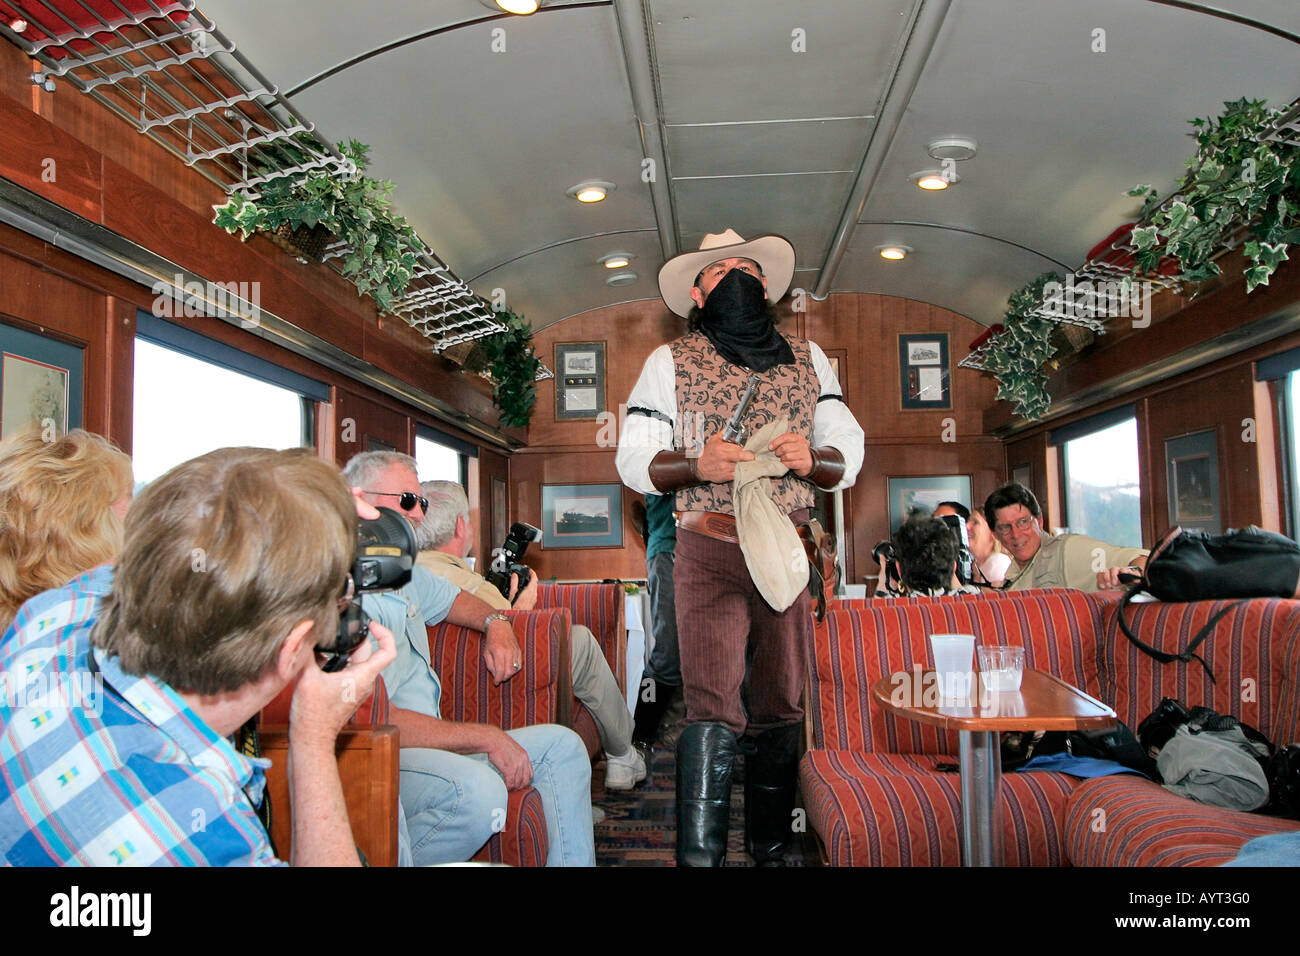 Masked gunmen in mock holdup on tourist train from Grand Canyon Stock Photo